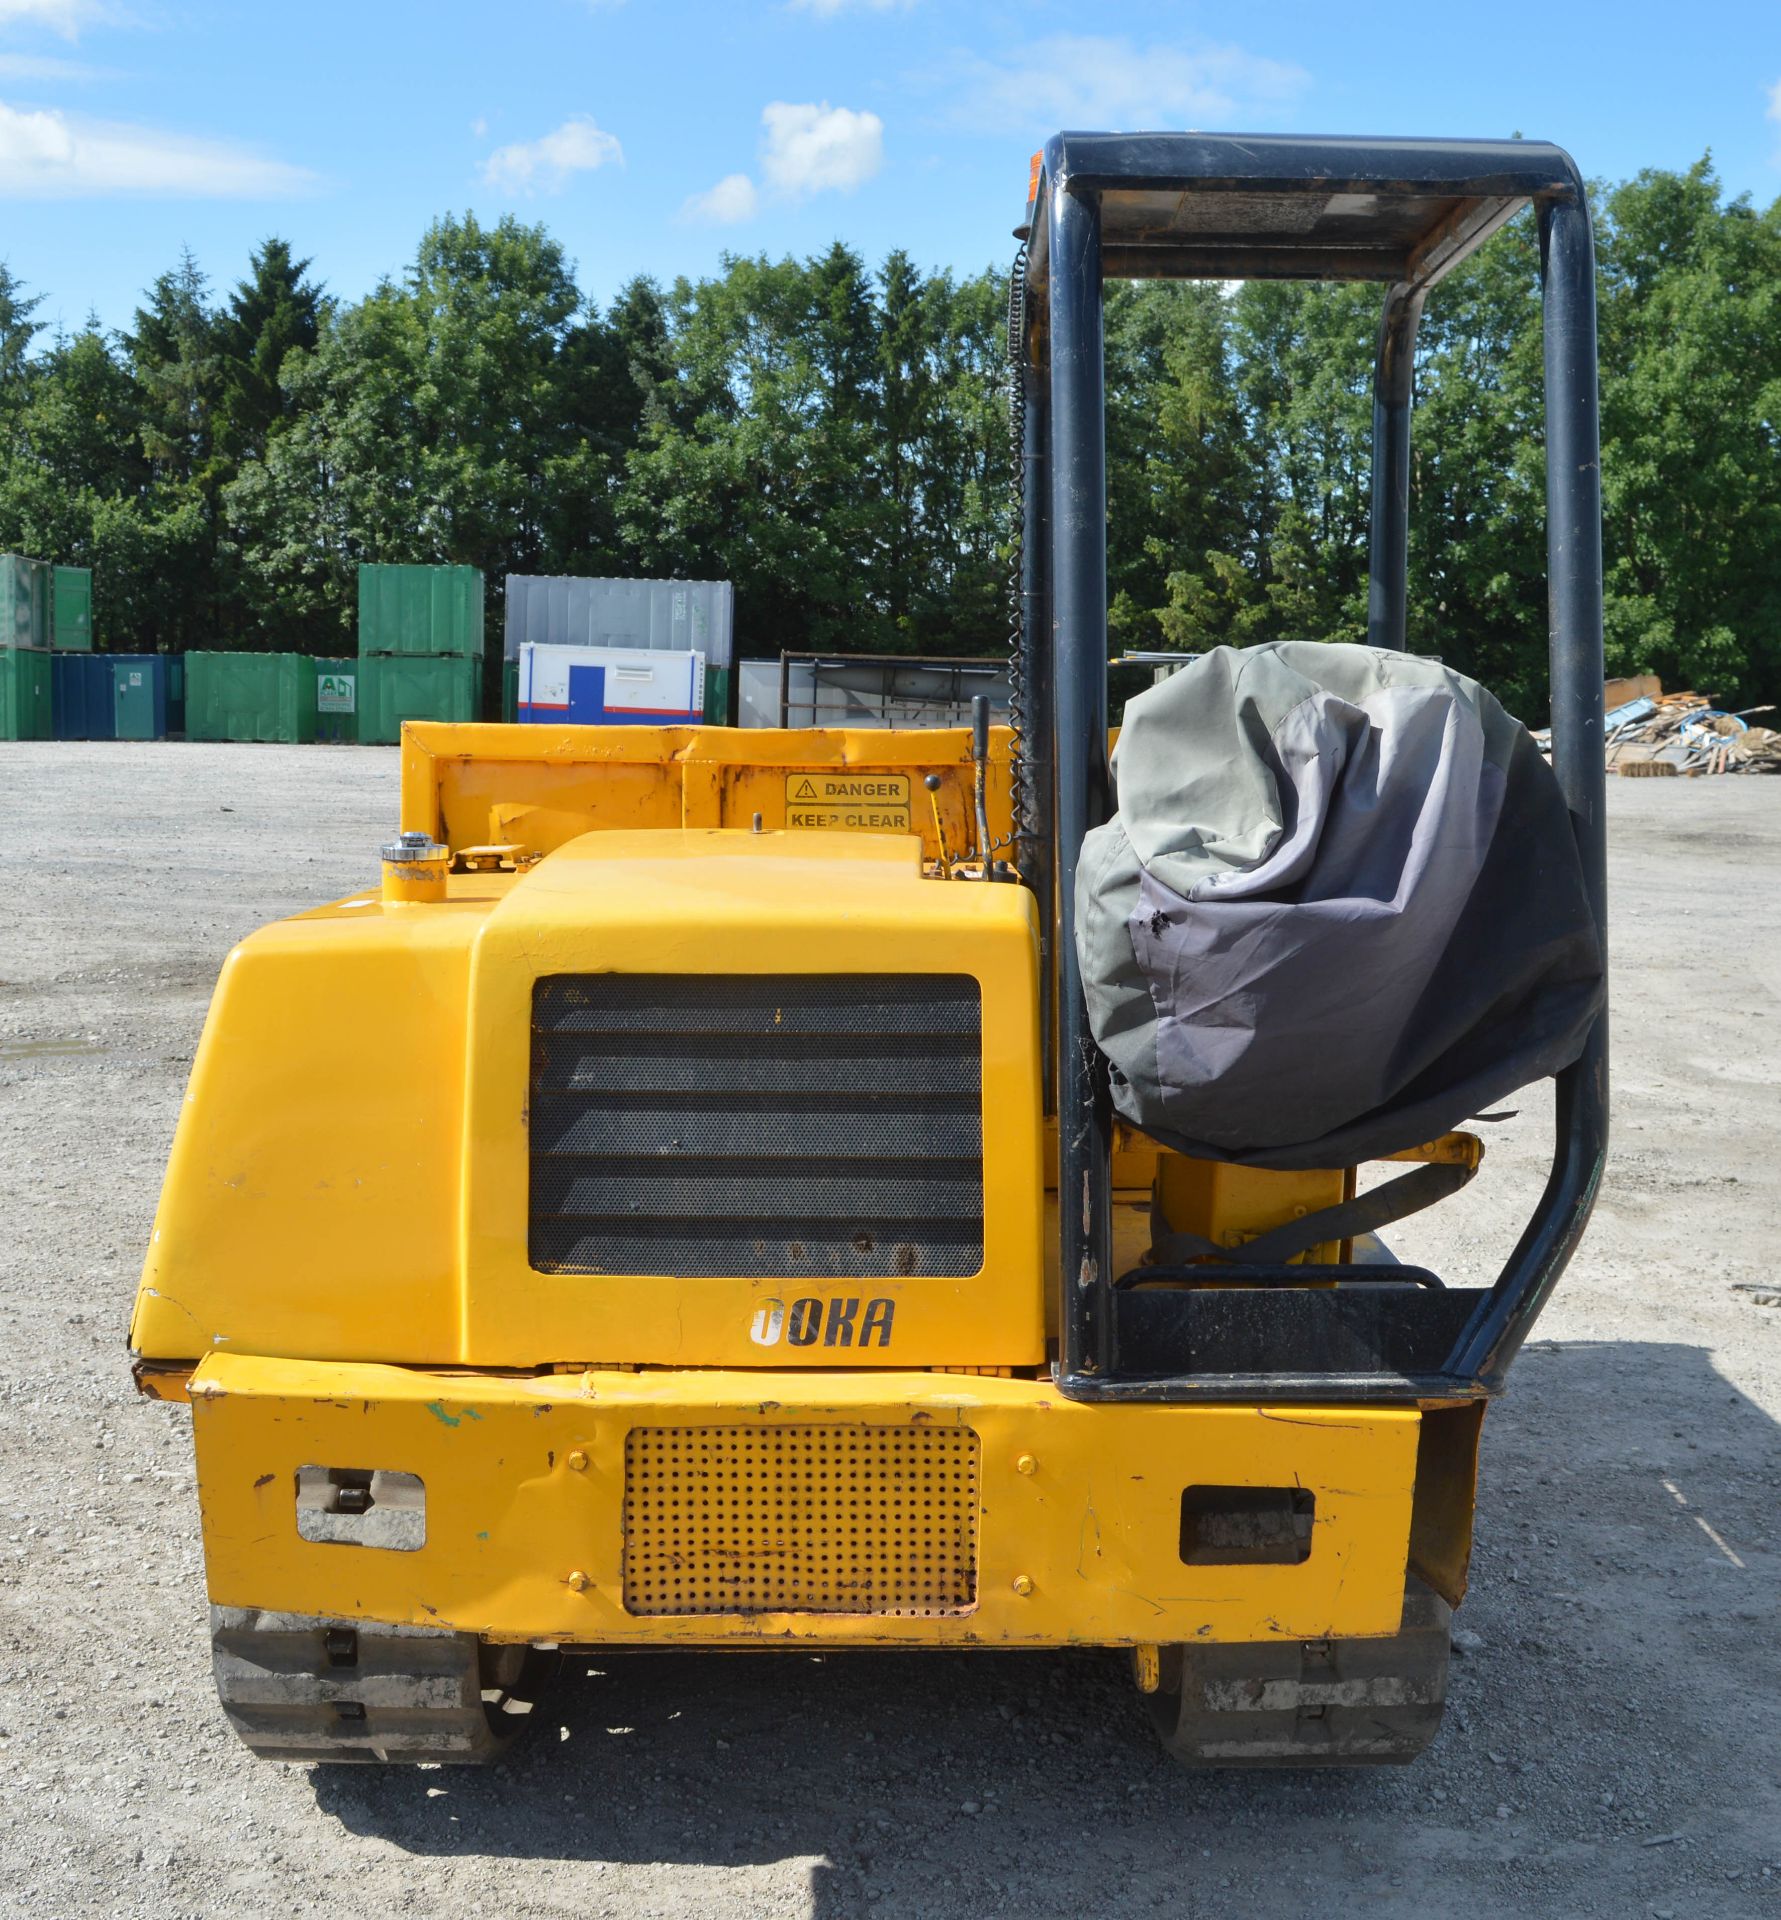 Morooka MST-300 VD rubber tracked straight skip dumper  S/N: 3320 Year: 2001 Recorded hours: 1408 - Image 5 of 9